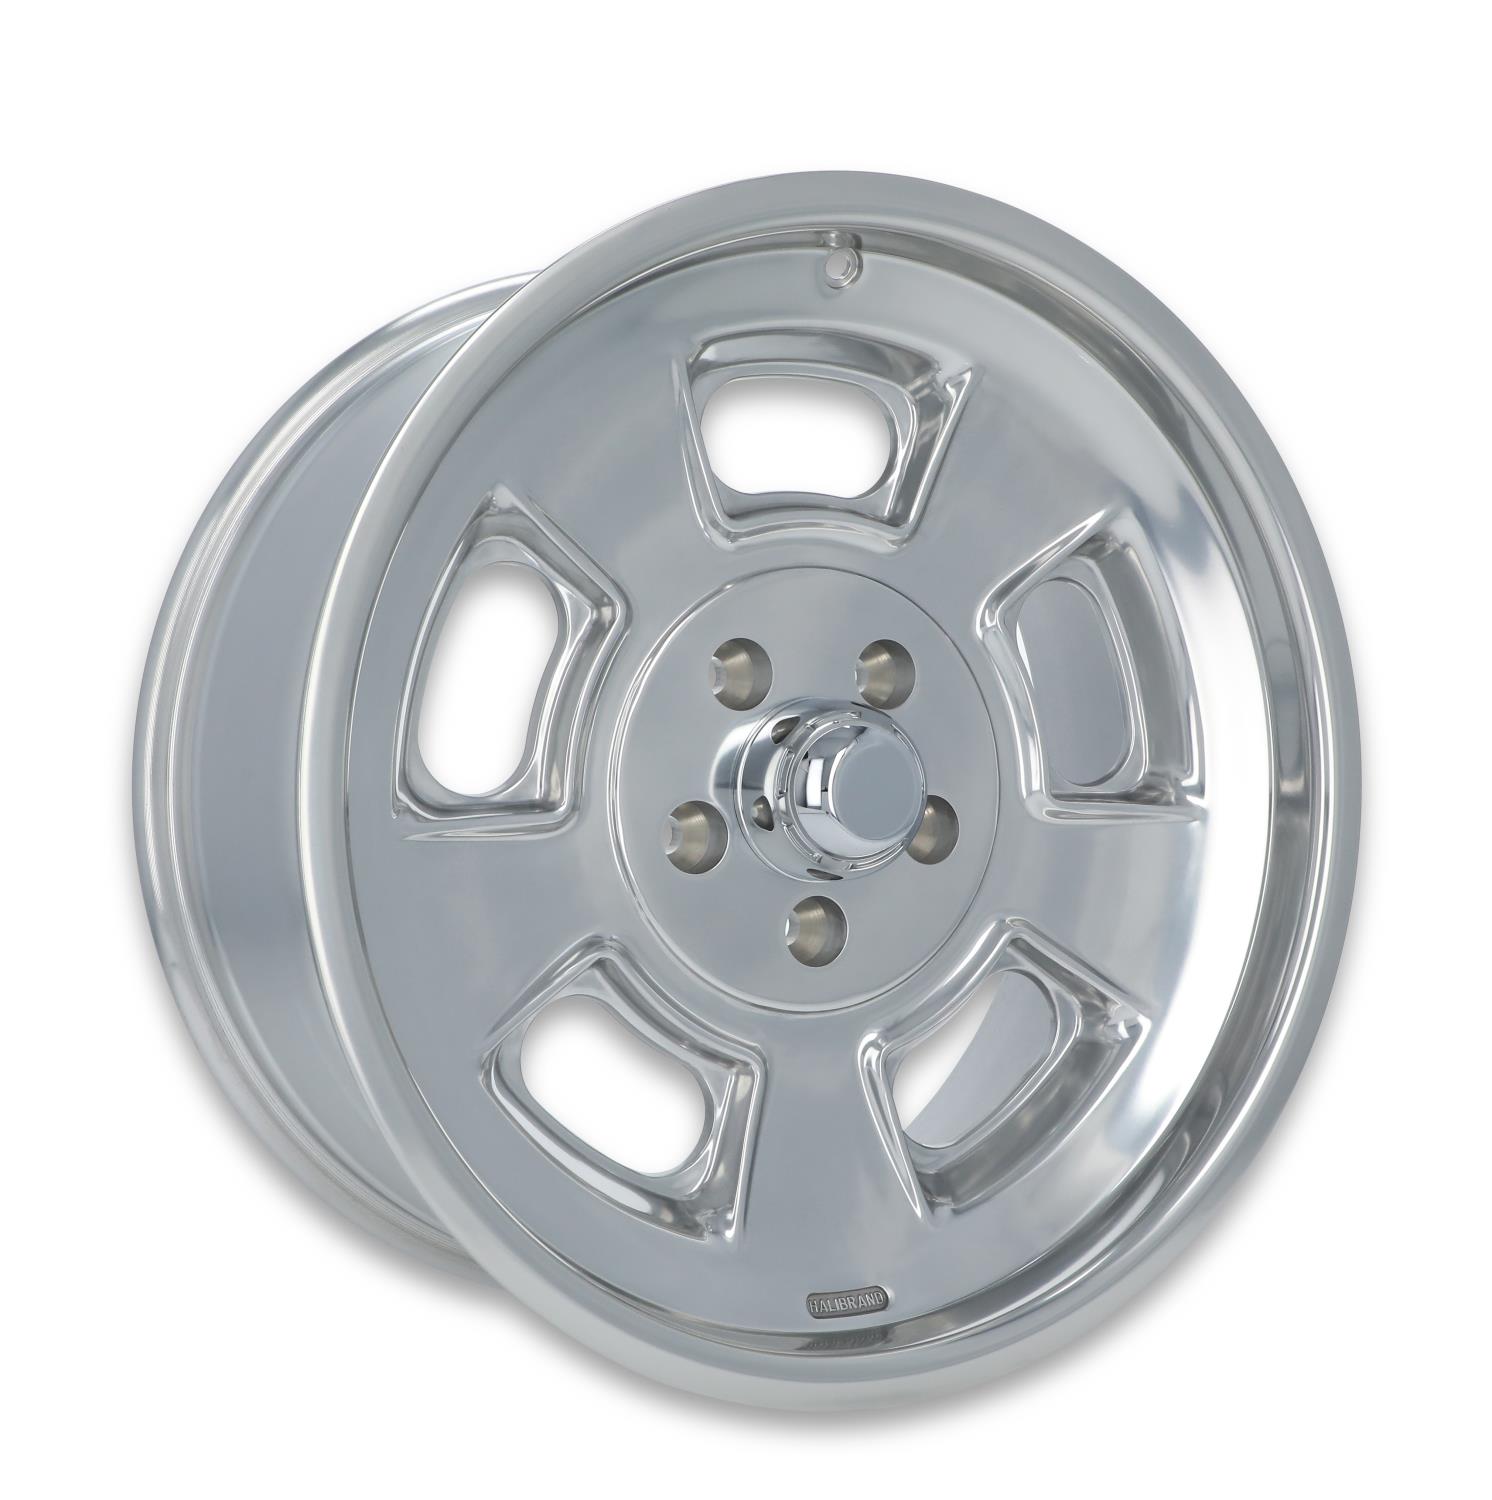 Sprint Front Wheel, Size: 19x8.5", Bolt Pattern: 5x5", Backspace: 5.25" [Polished - Gloss Clearcoat]